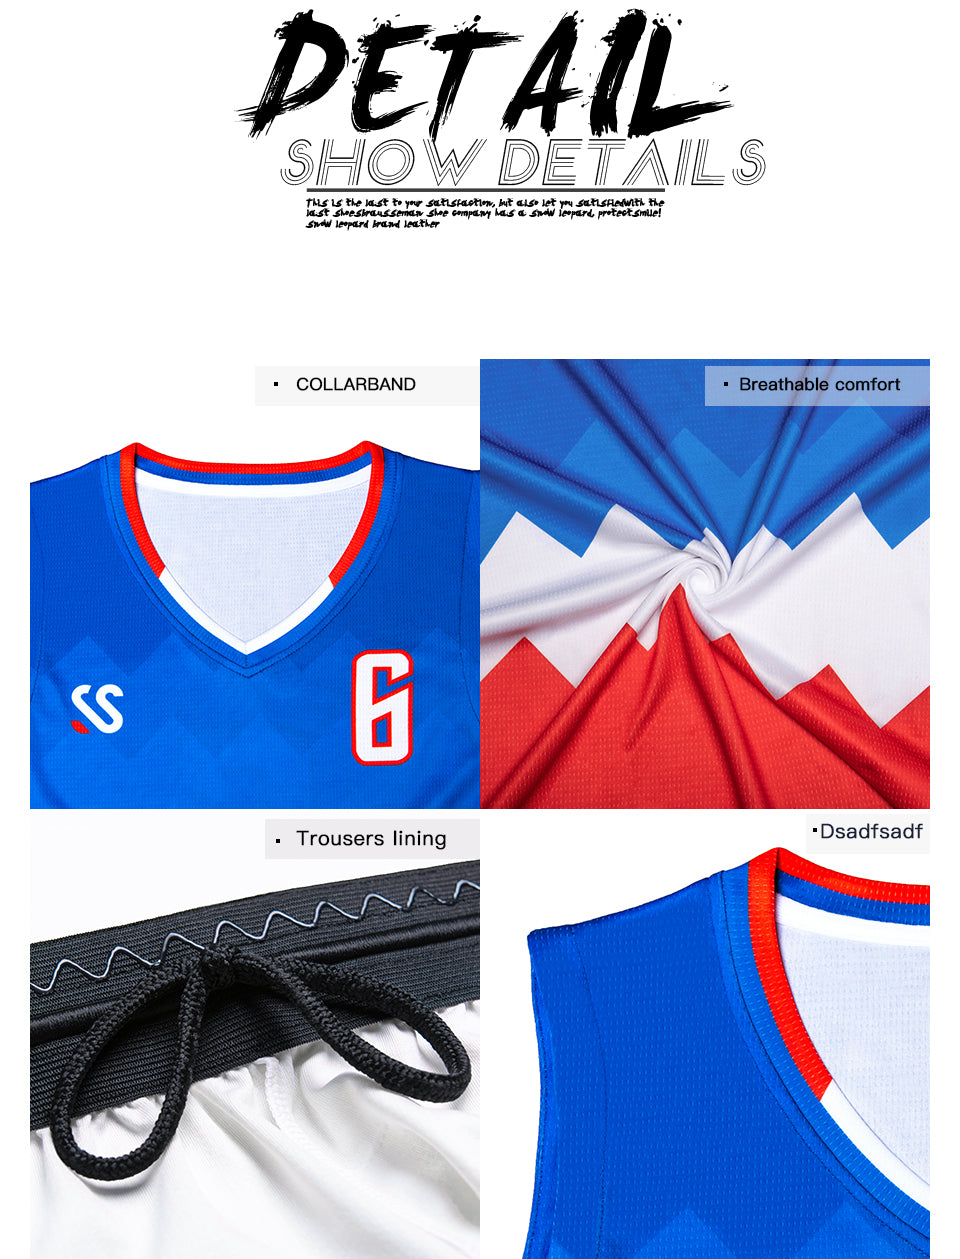 Custom Round Neck Basketball Jersey Full Sublimation Team Name/Number Breathable Training Athletic Shirts for Male/Lady/Kids